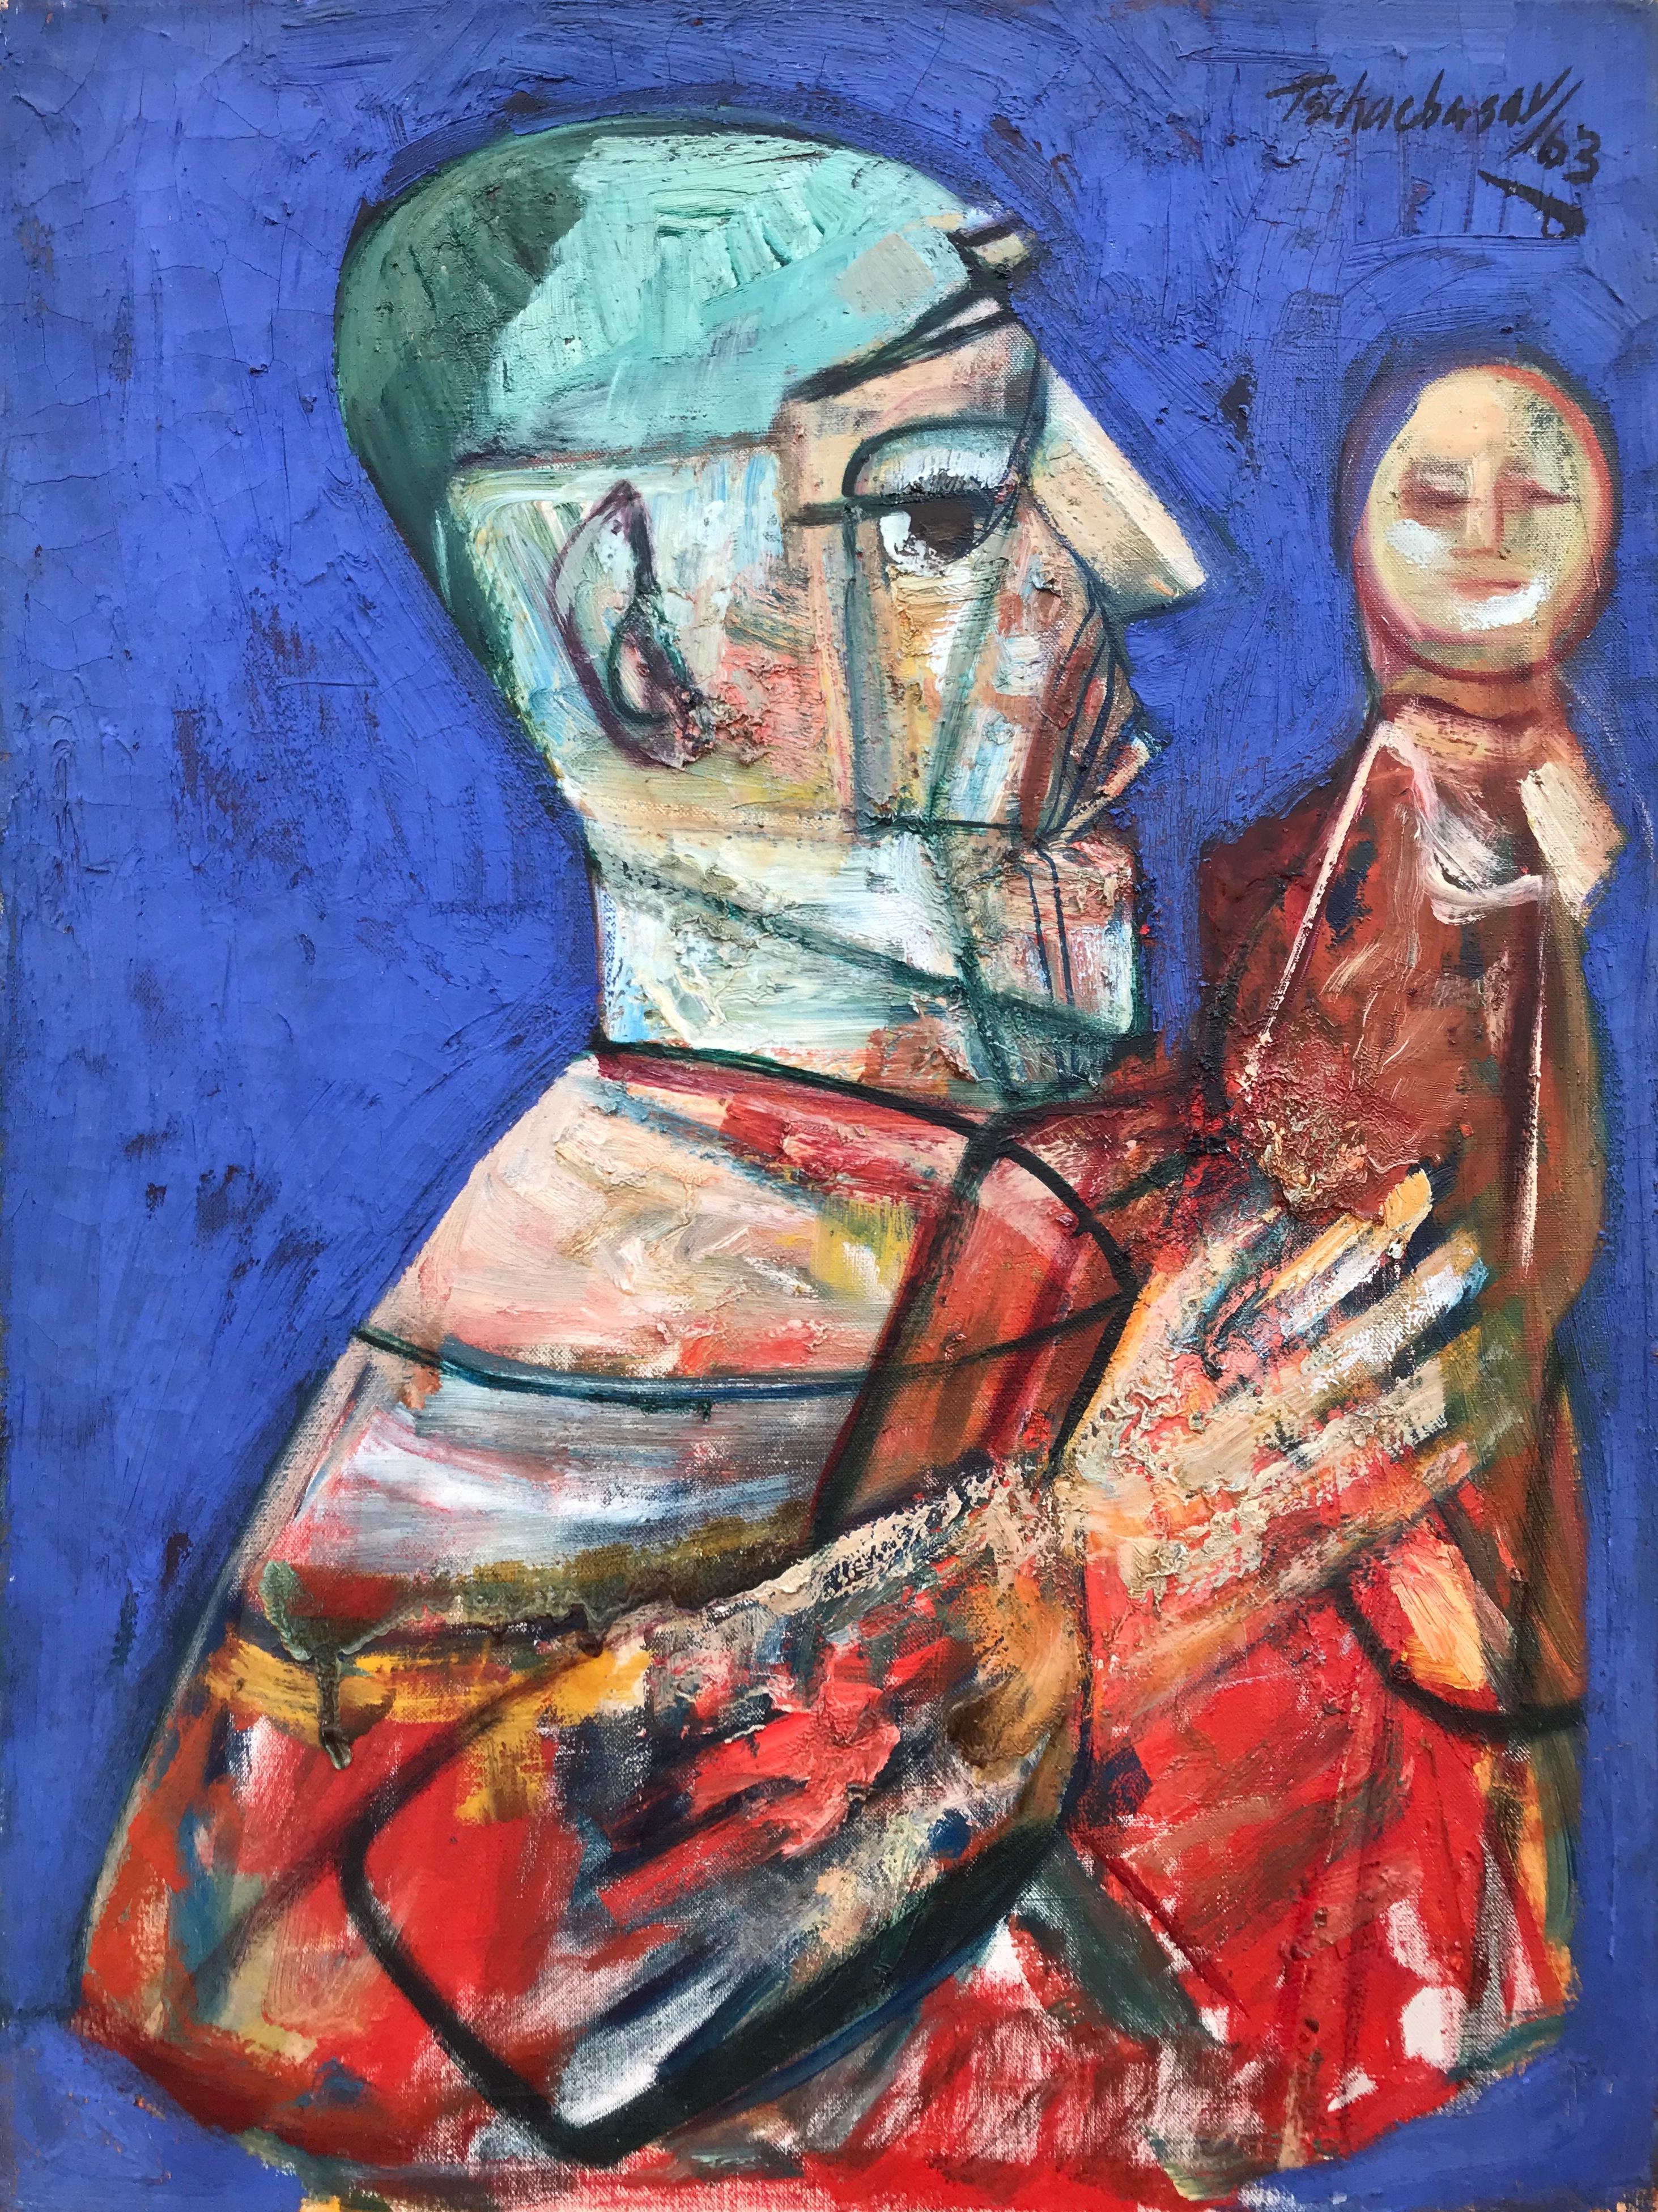 Nahum Tschacbasov Figurative Painting - “Father with Child”